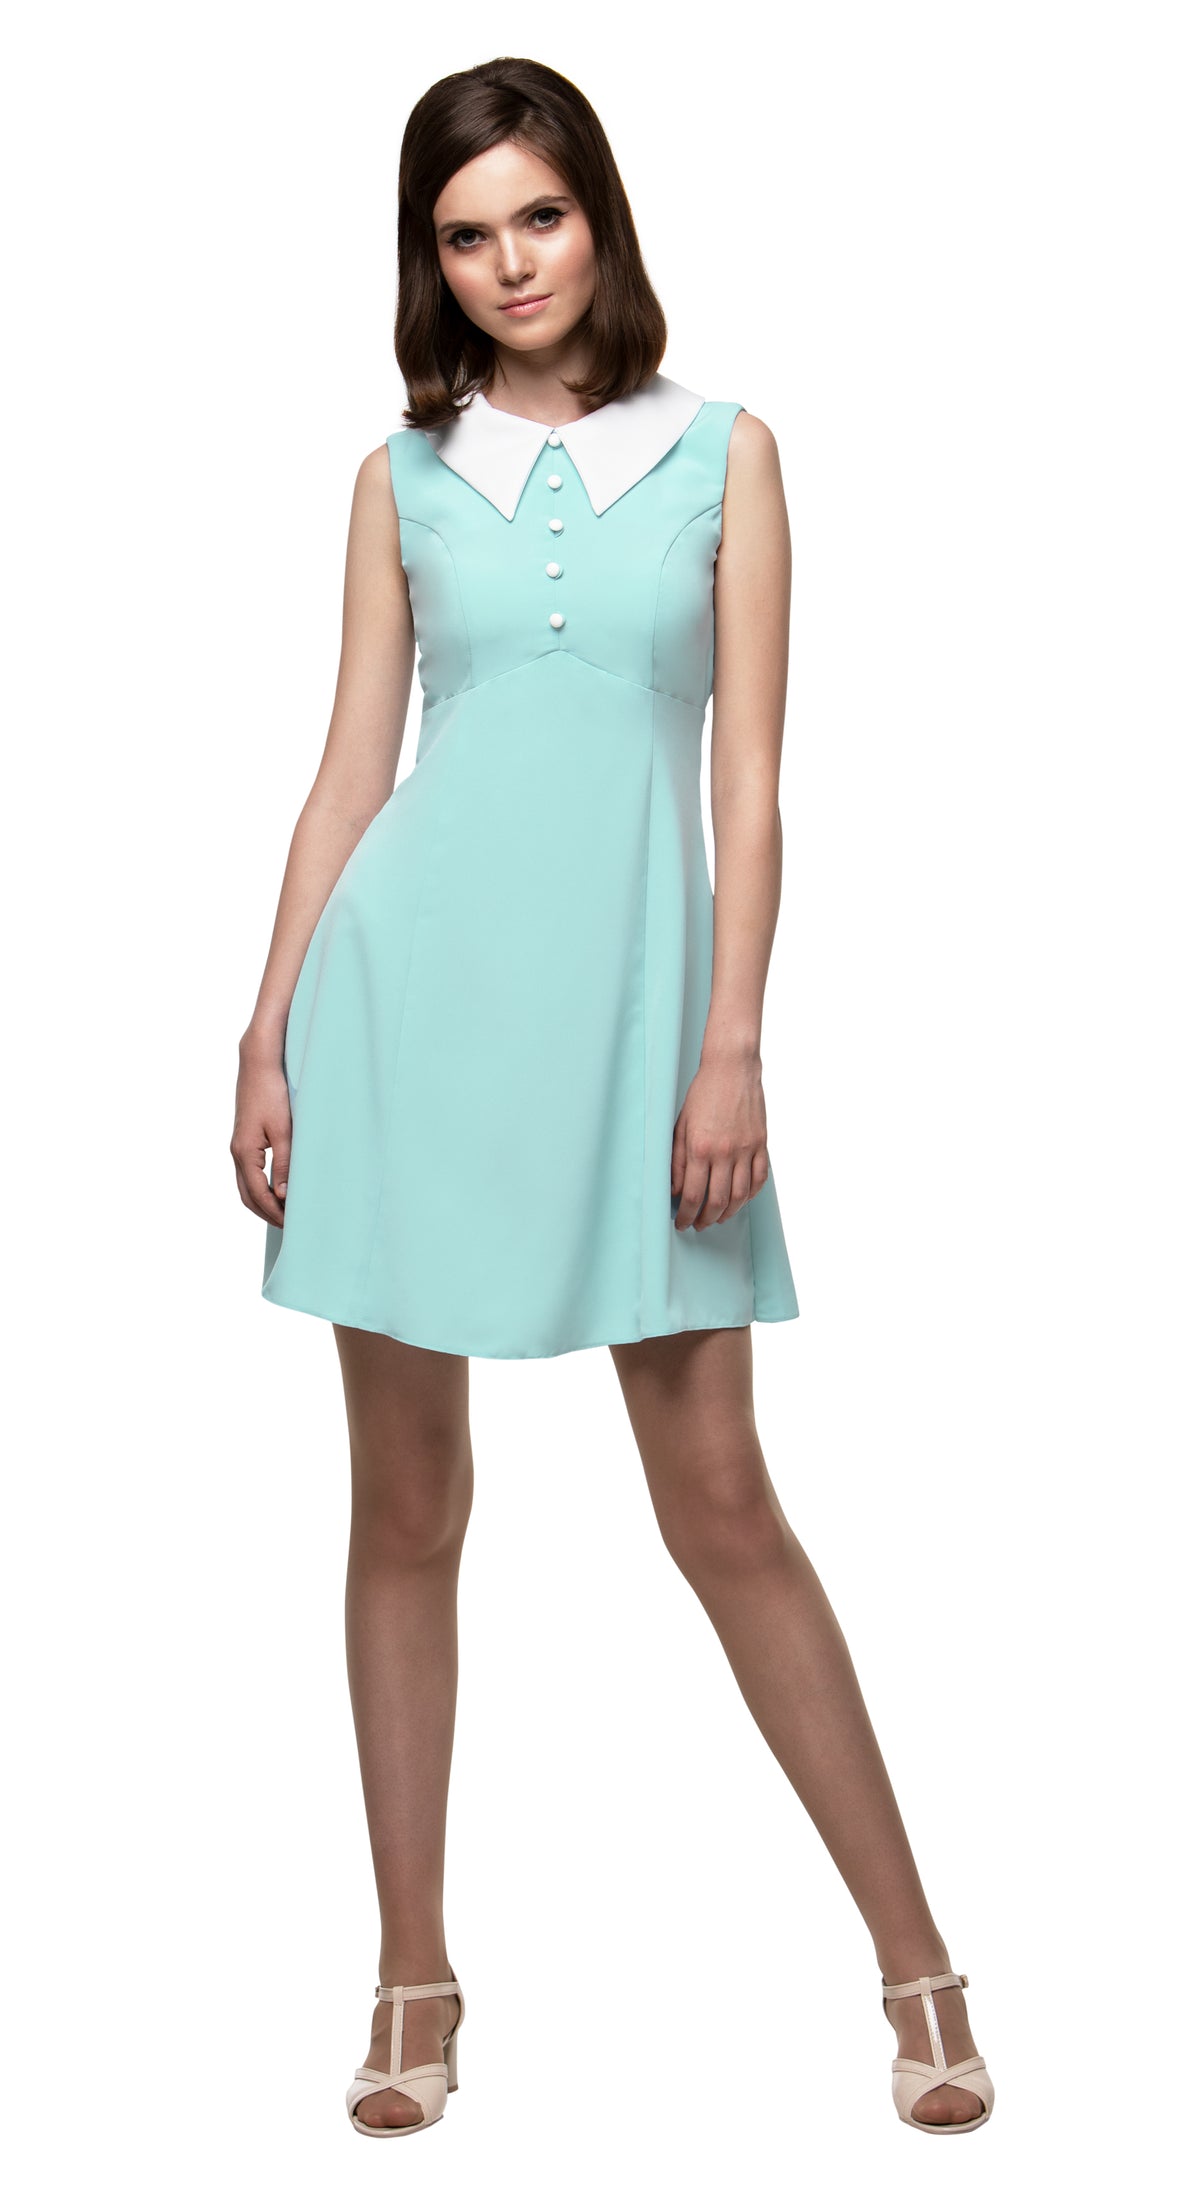 1960s Style Dress with Collar in Mint Green